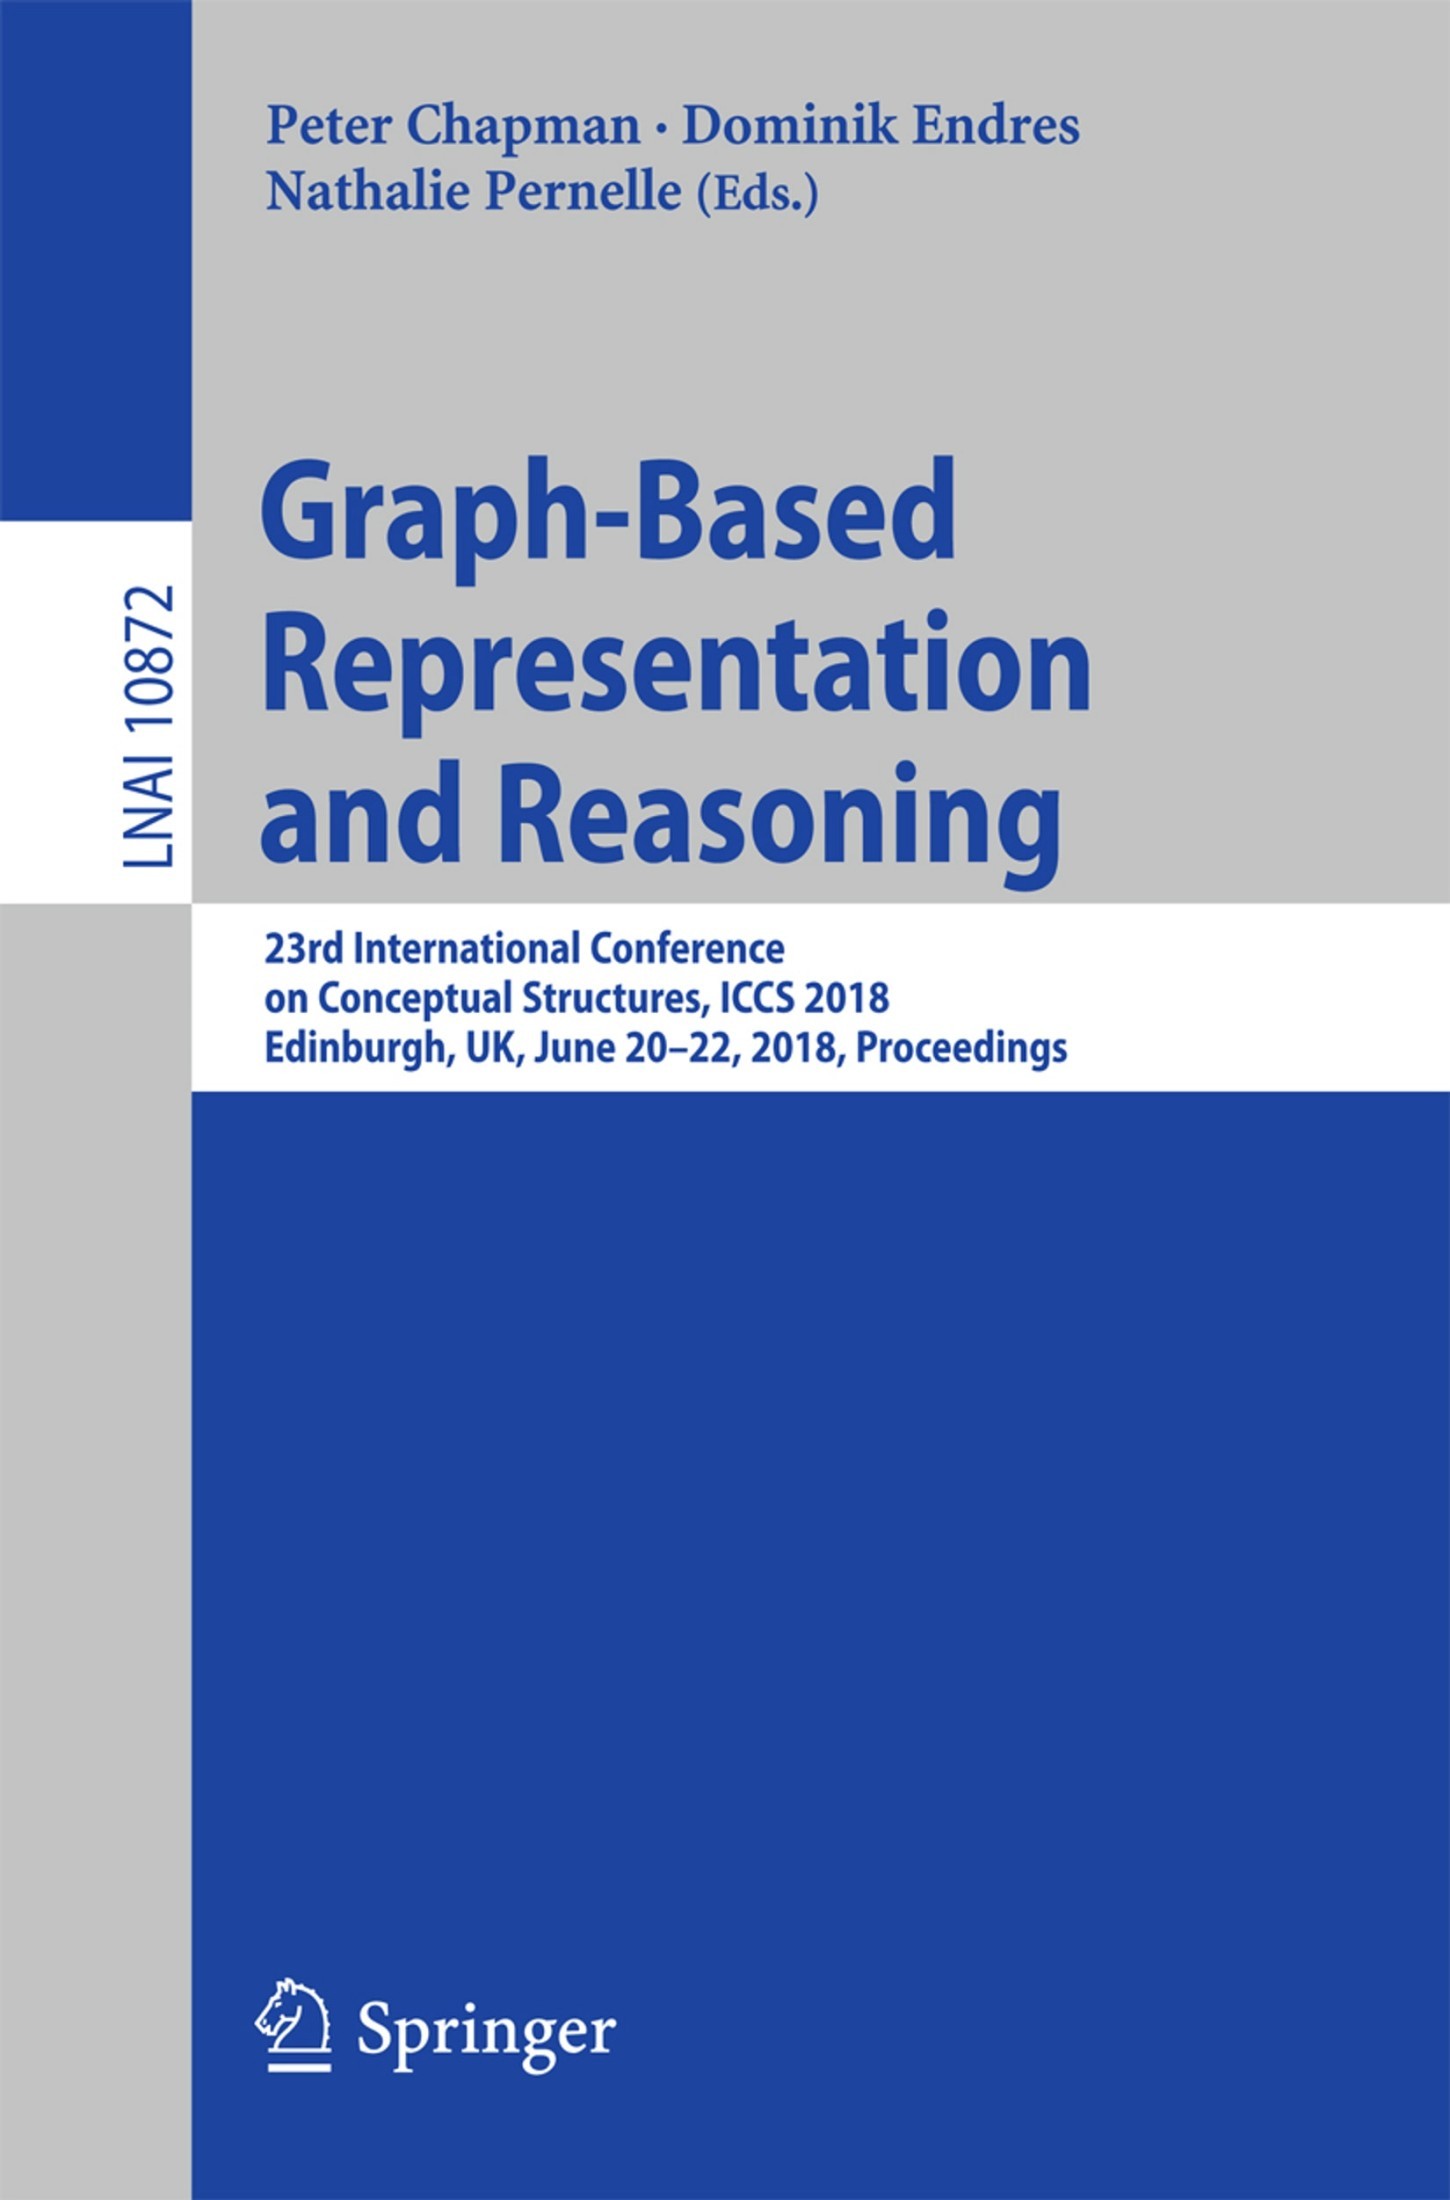 Graph-Based Representation and Reasoning: 23rd International Conference on Conceptual Structures, ICCS 2018, Edinburgh, UK, June 20-22, 2018, Proceedings